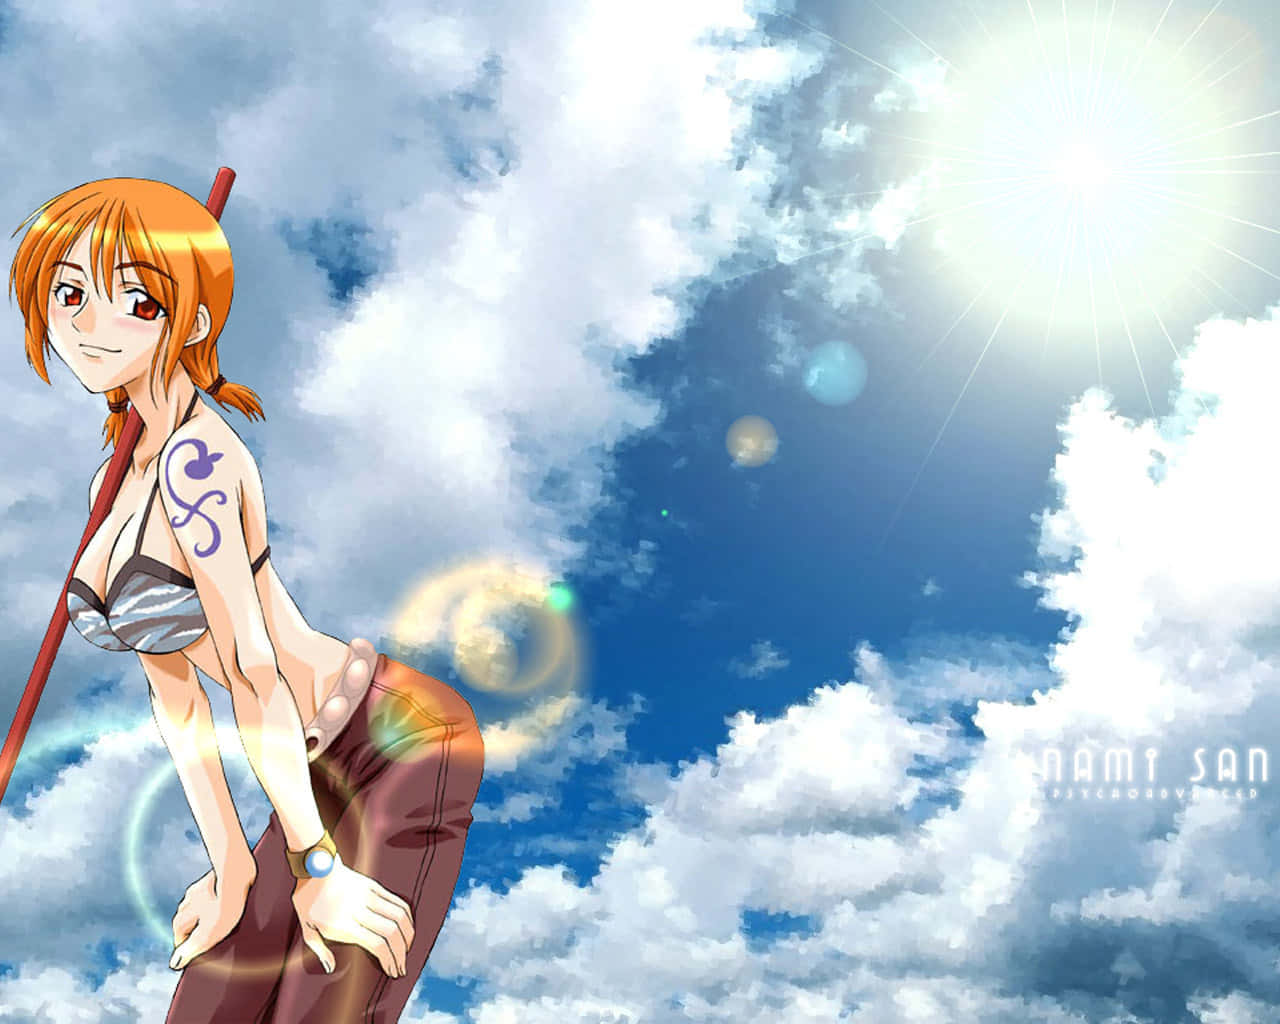 Caption: Nami from One Piece displaying her fearless spirit Wallpaper